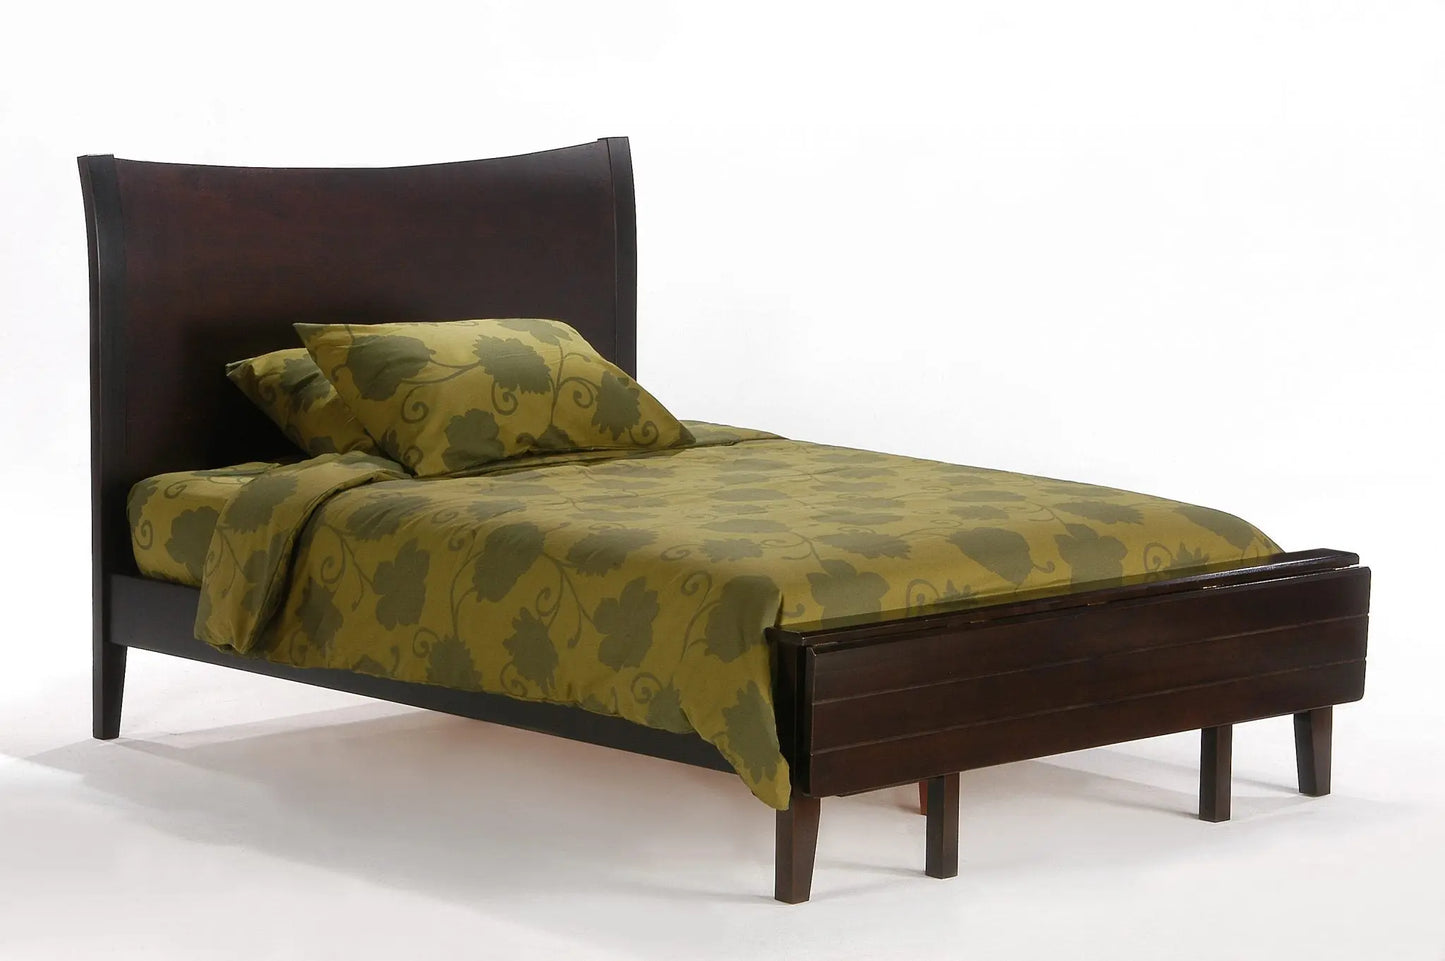 SAFFRON BED night and day furniture